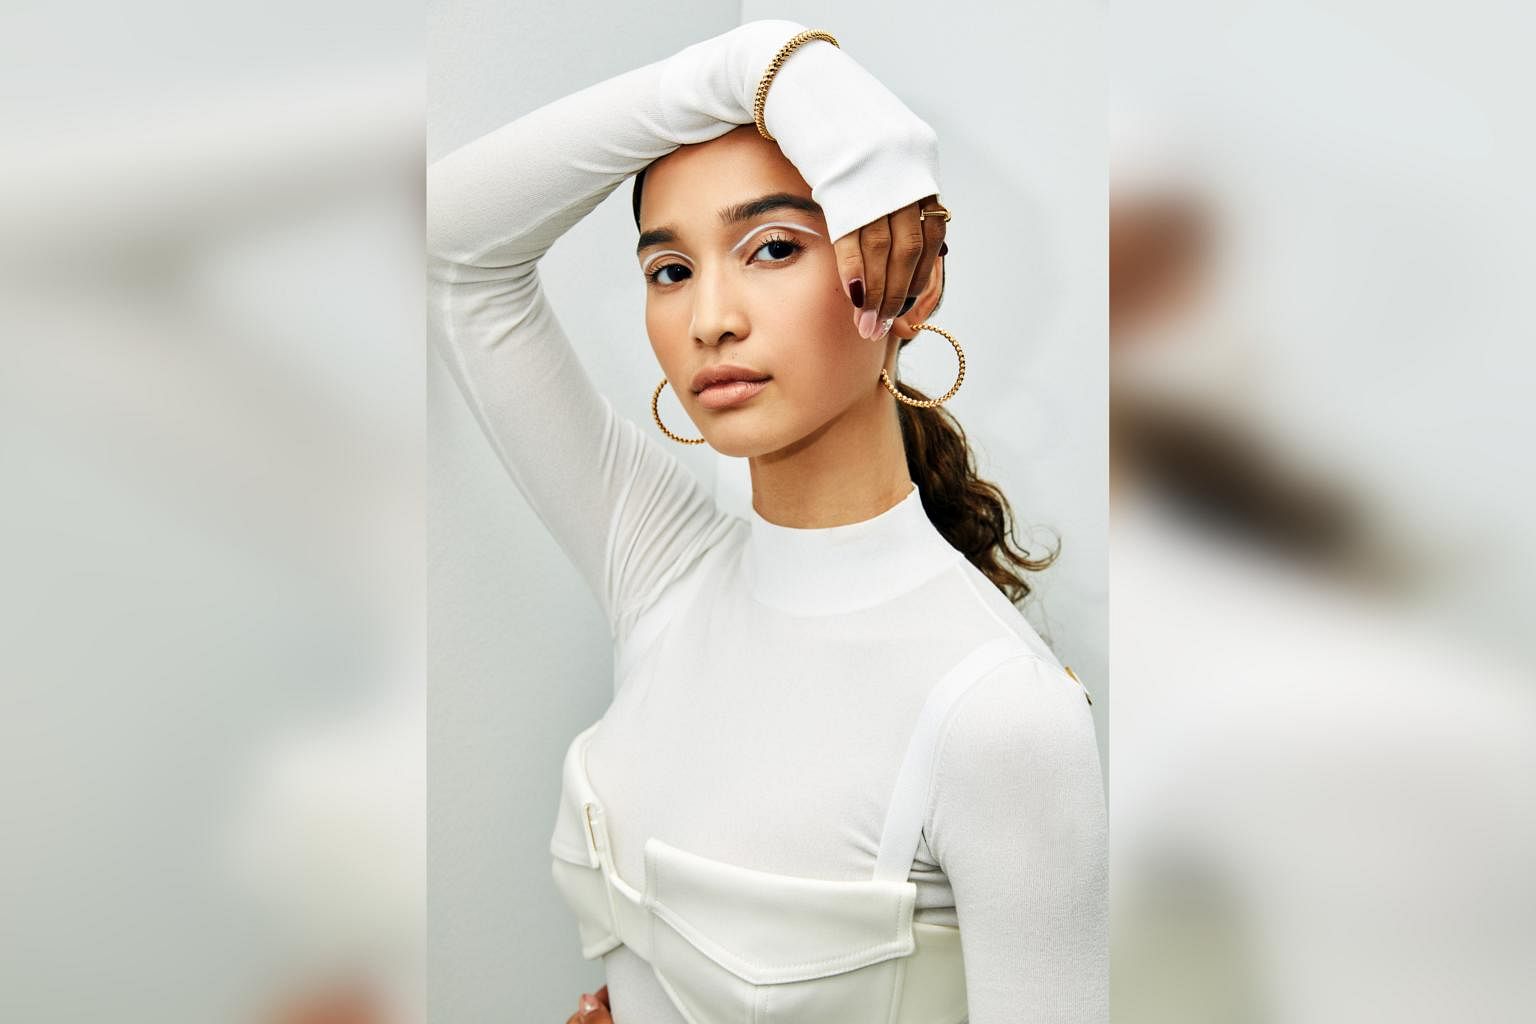 Iman Fandi followed her mother's footsteps and started modelling early